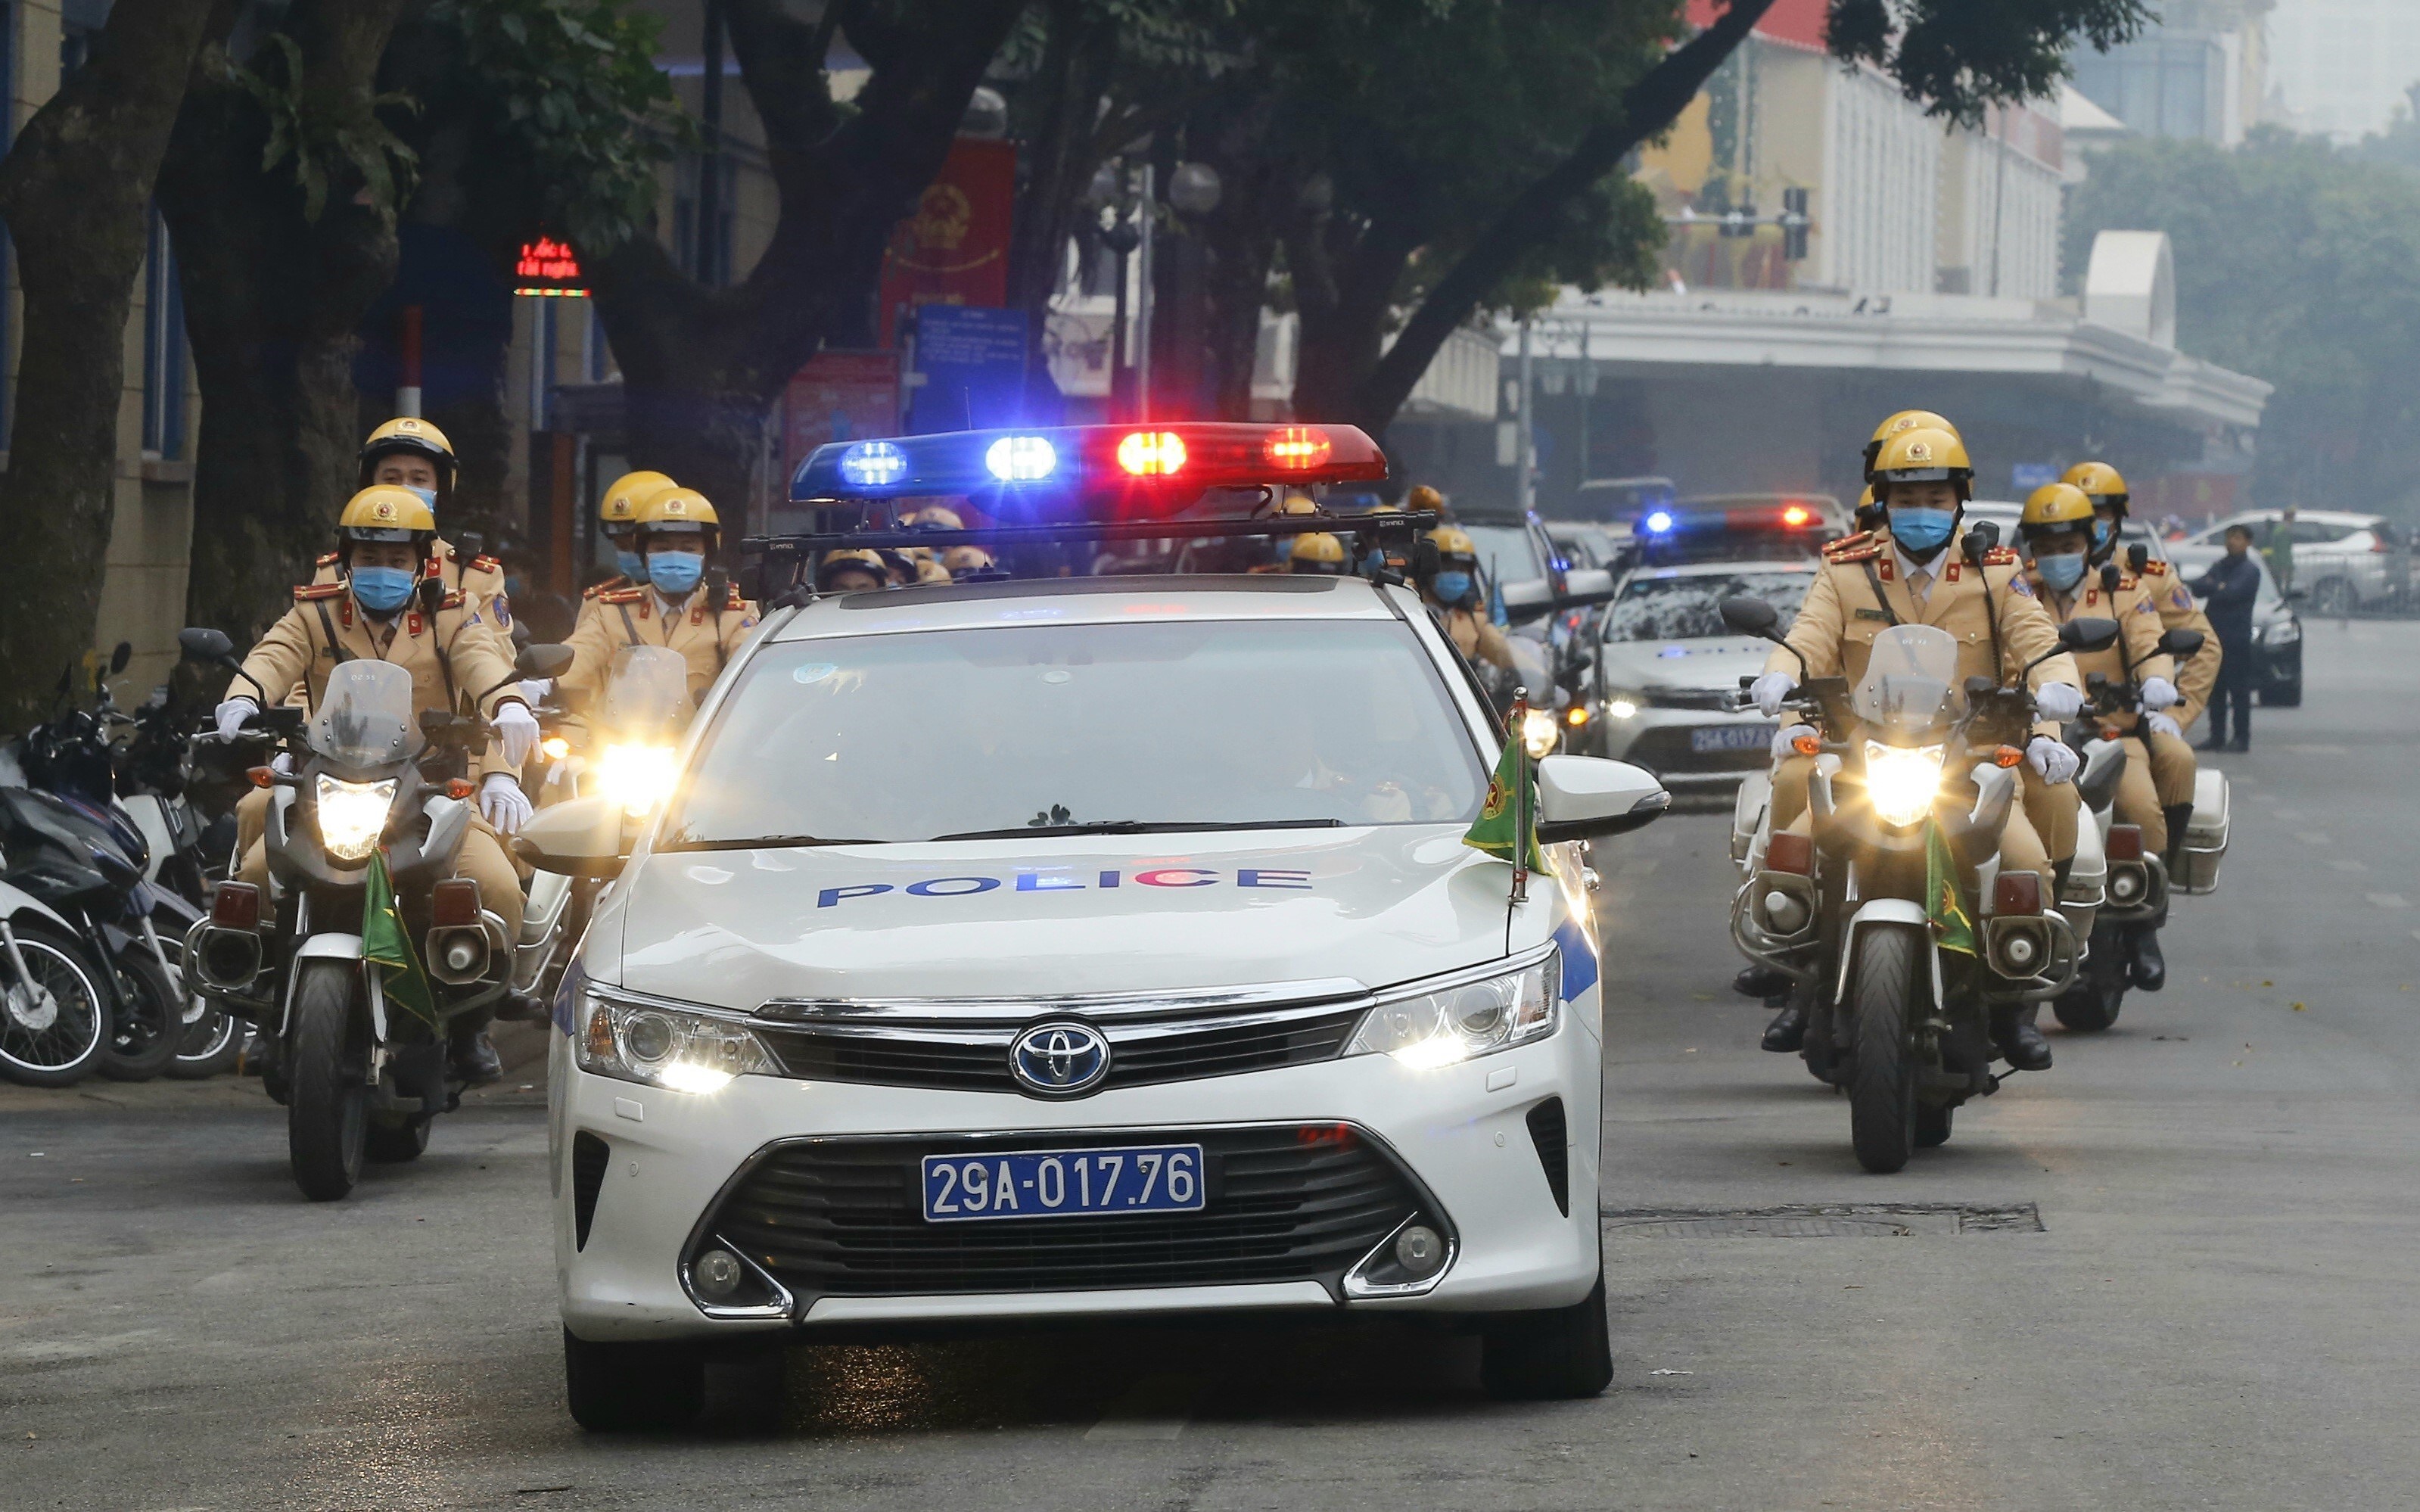 2021 National Traffic Safety Year launched hinh anh 1